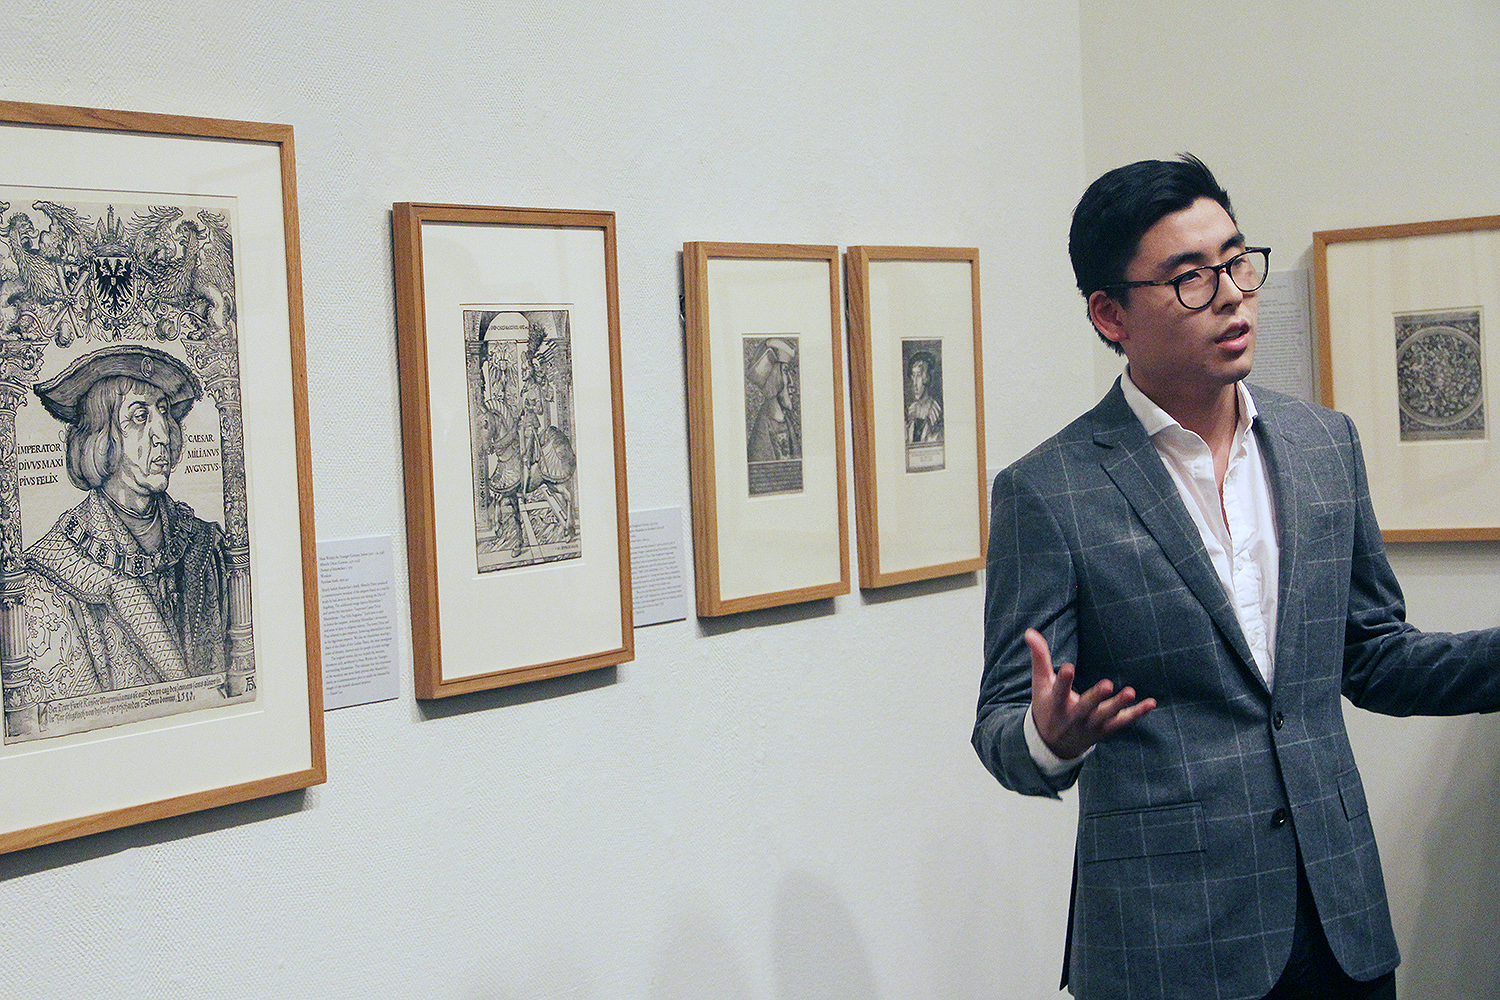 Daniel Lee '16 spoke about the prints commissioned by Holy Roman Emperor Maximilian I (1459-1519).